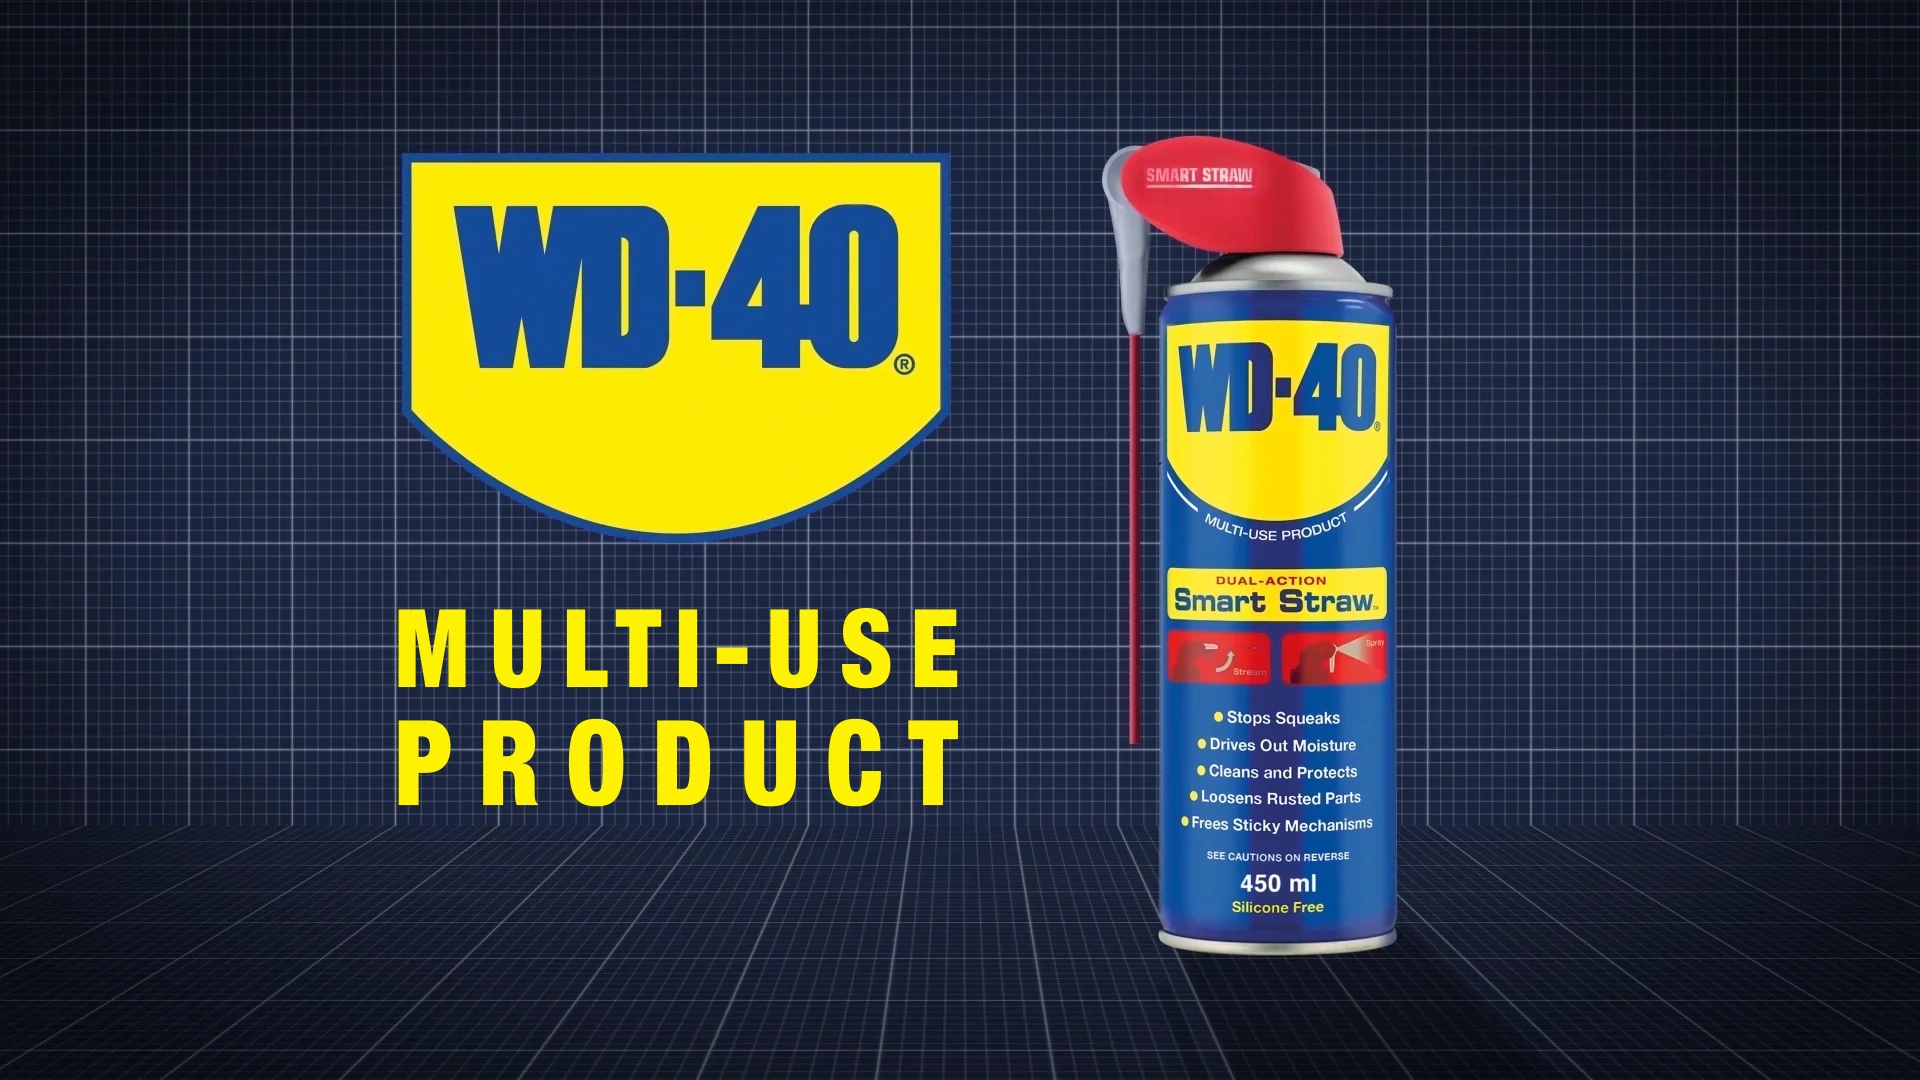 WD-40 Multi-Use Product Smart Straw